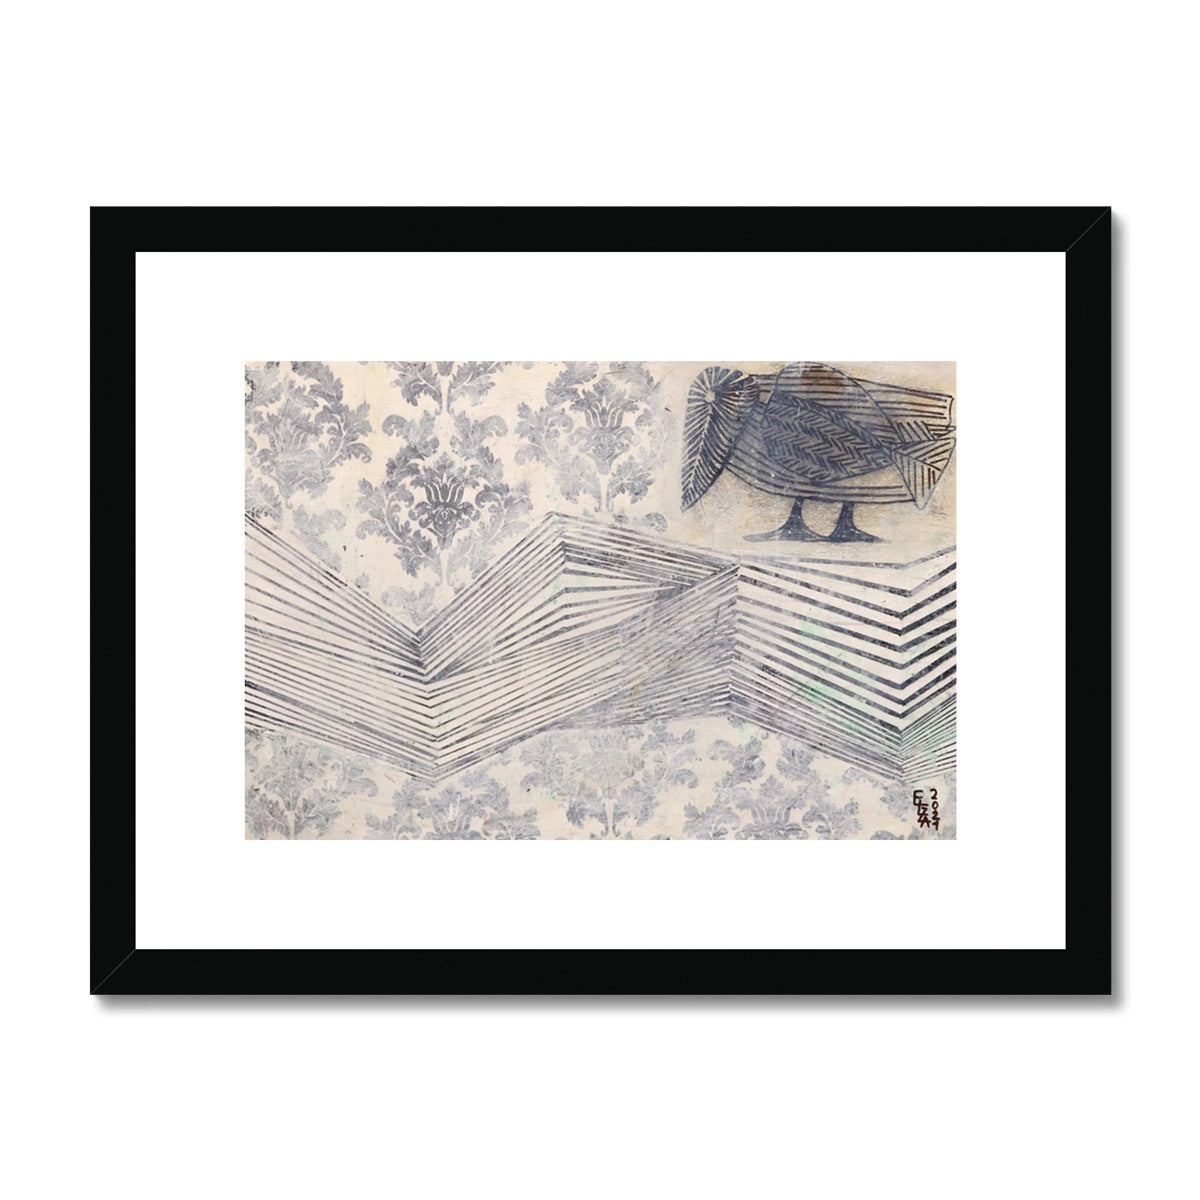 Reflective Series 1, Framed & Mounted Print